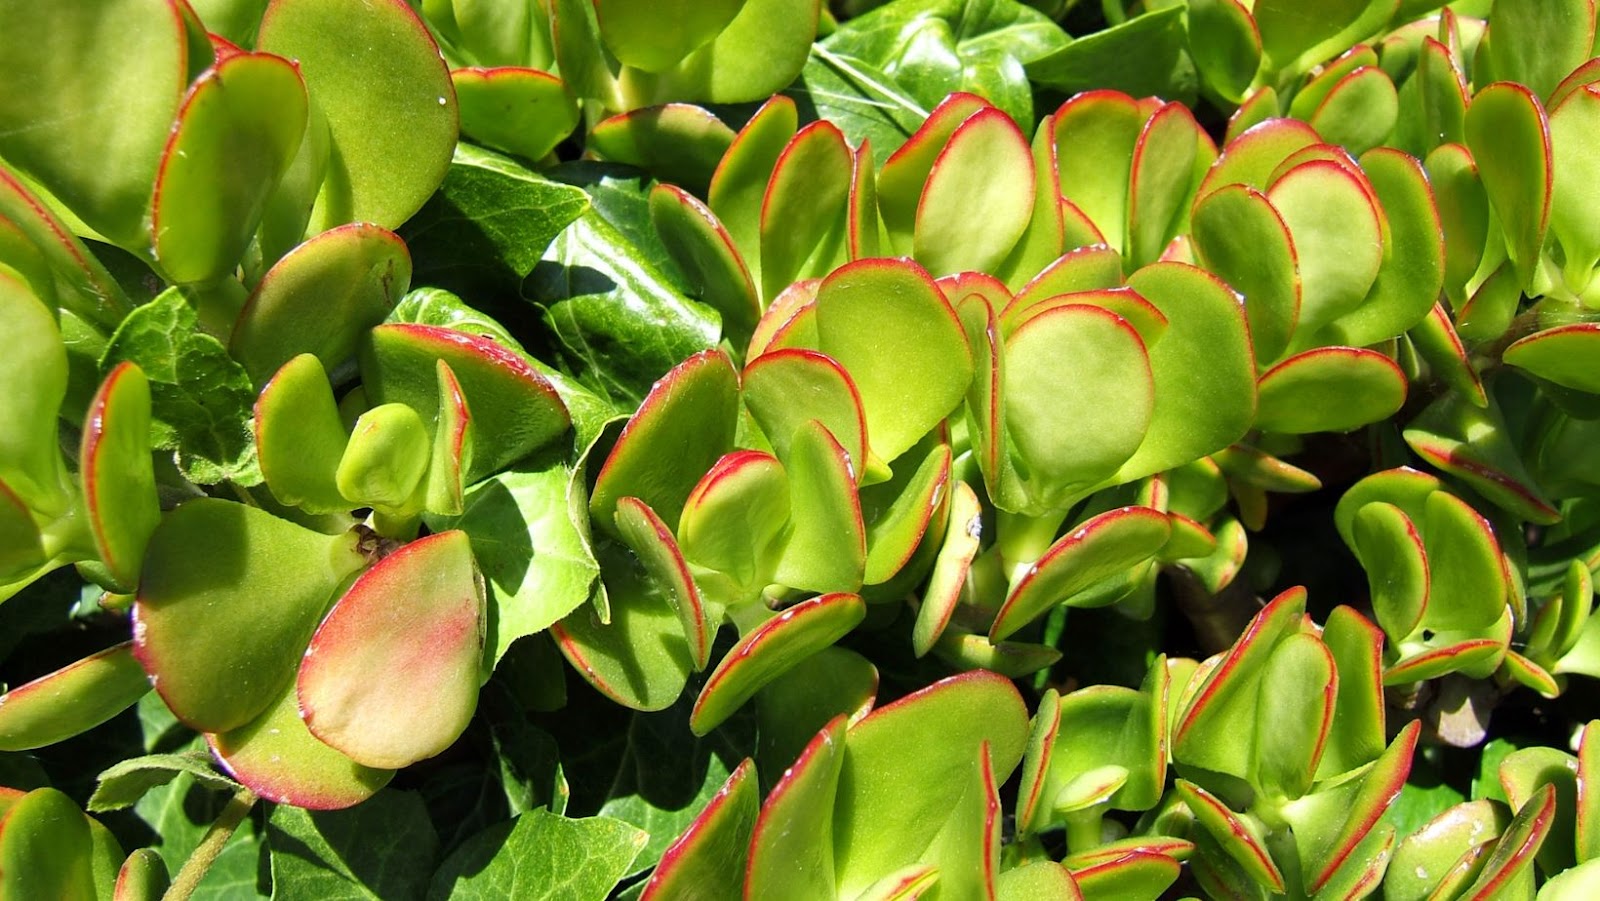 How Can Jade Plant Poisoning Be Prevented?